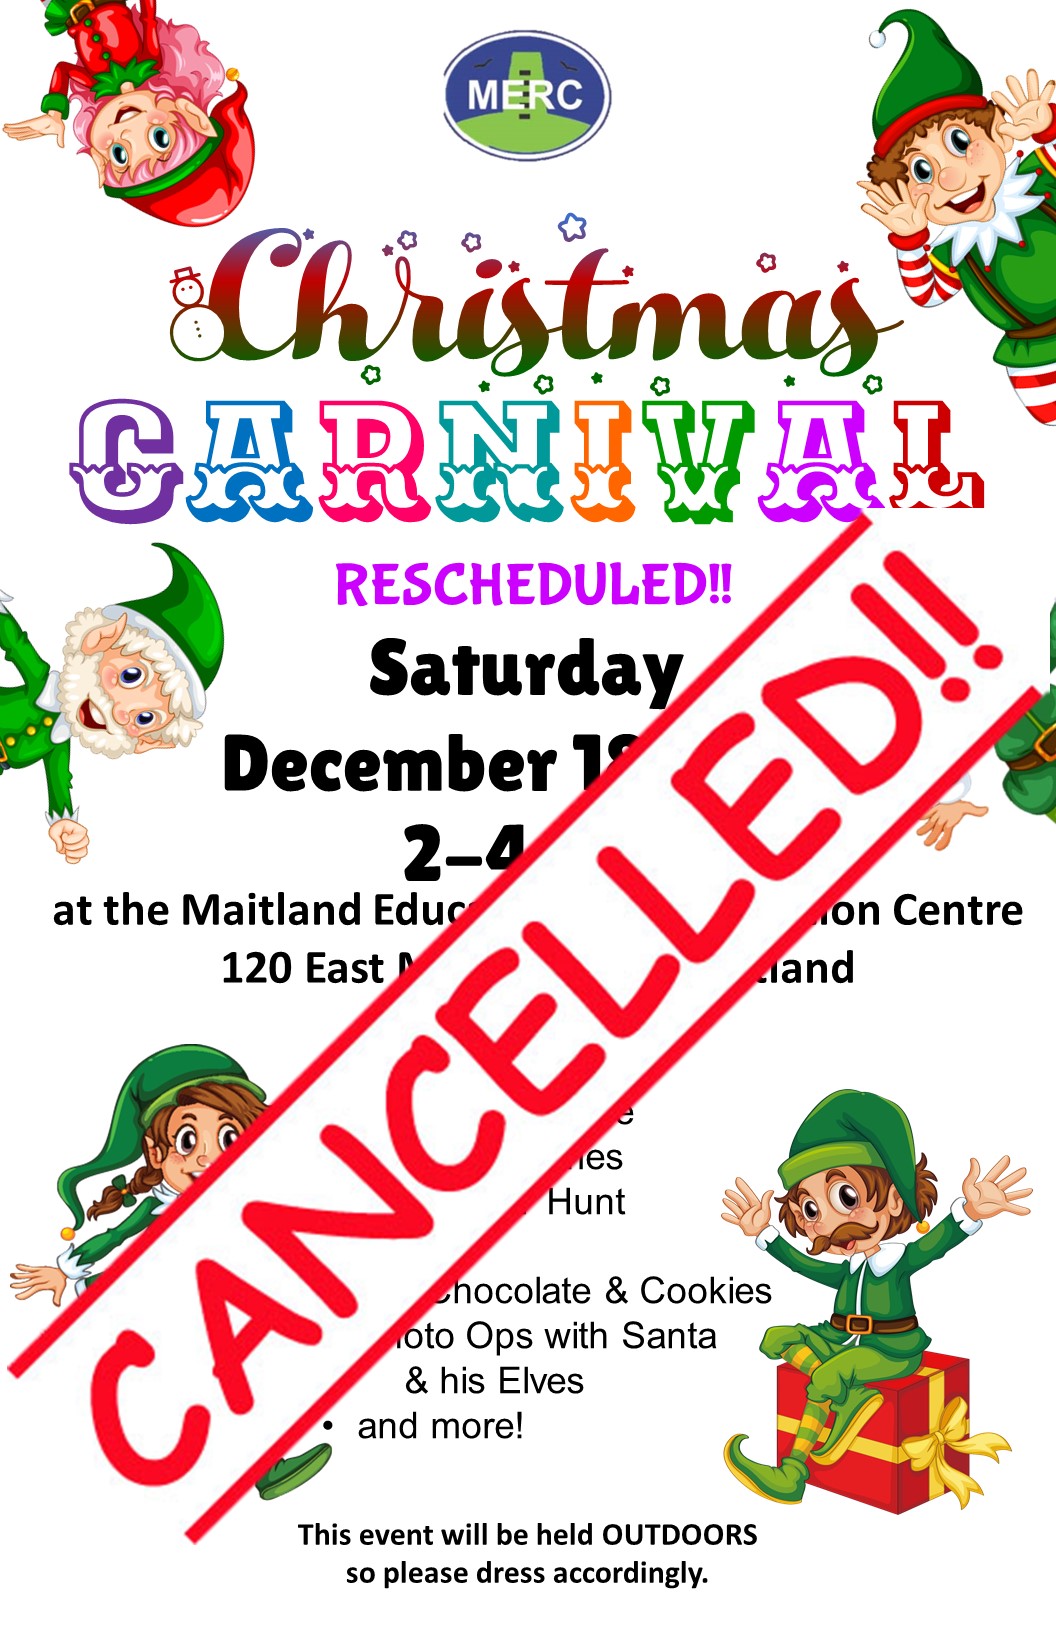 MERC's christmas carnival poster announcing the event has been cancelled.